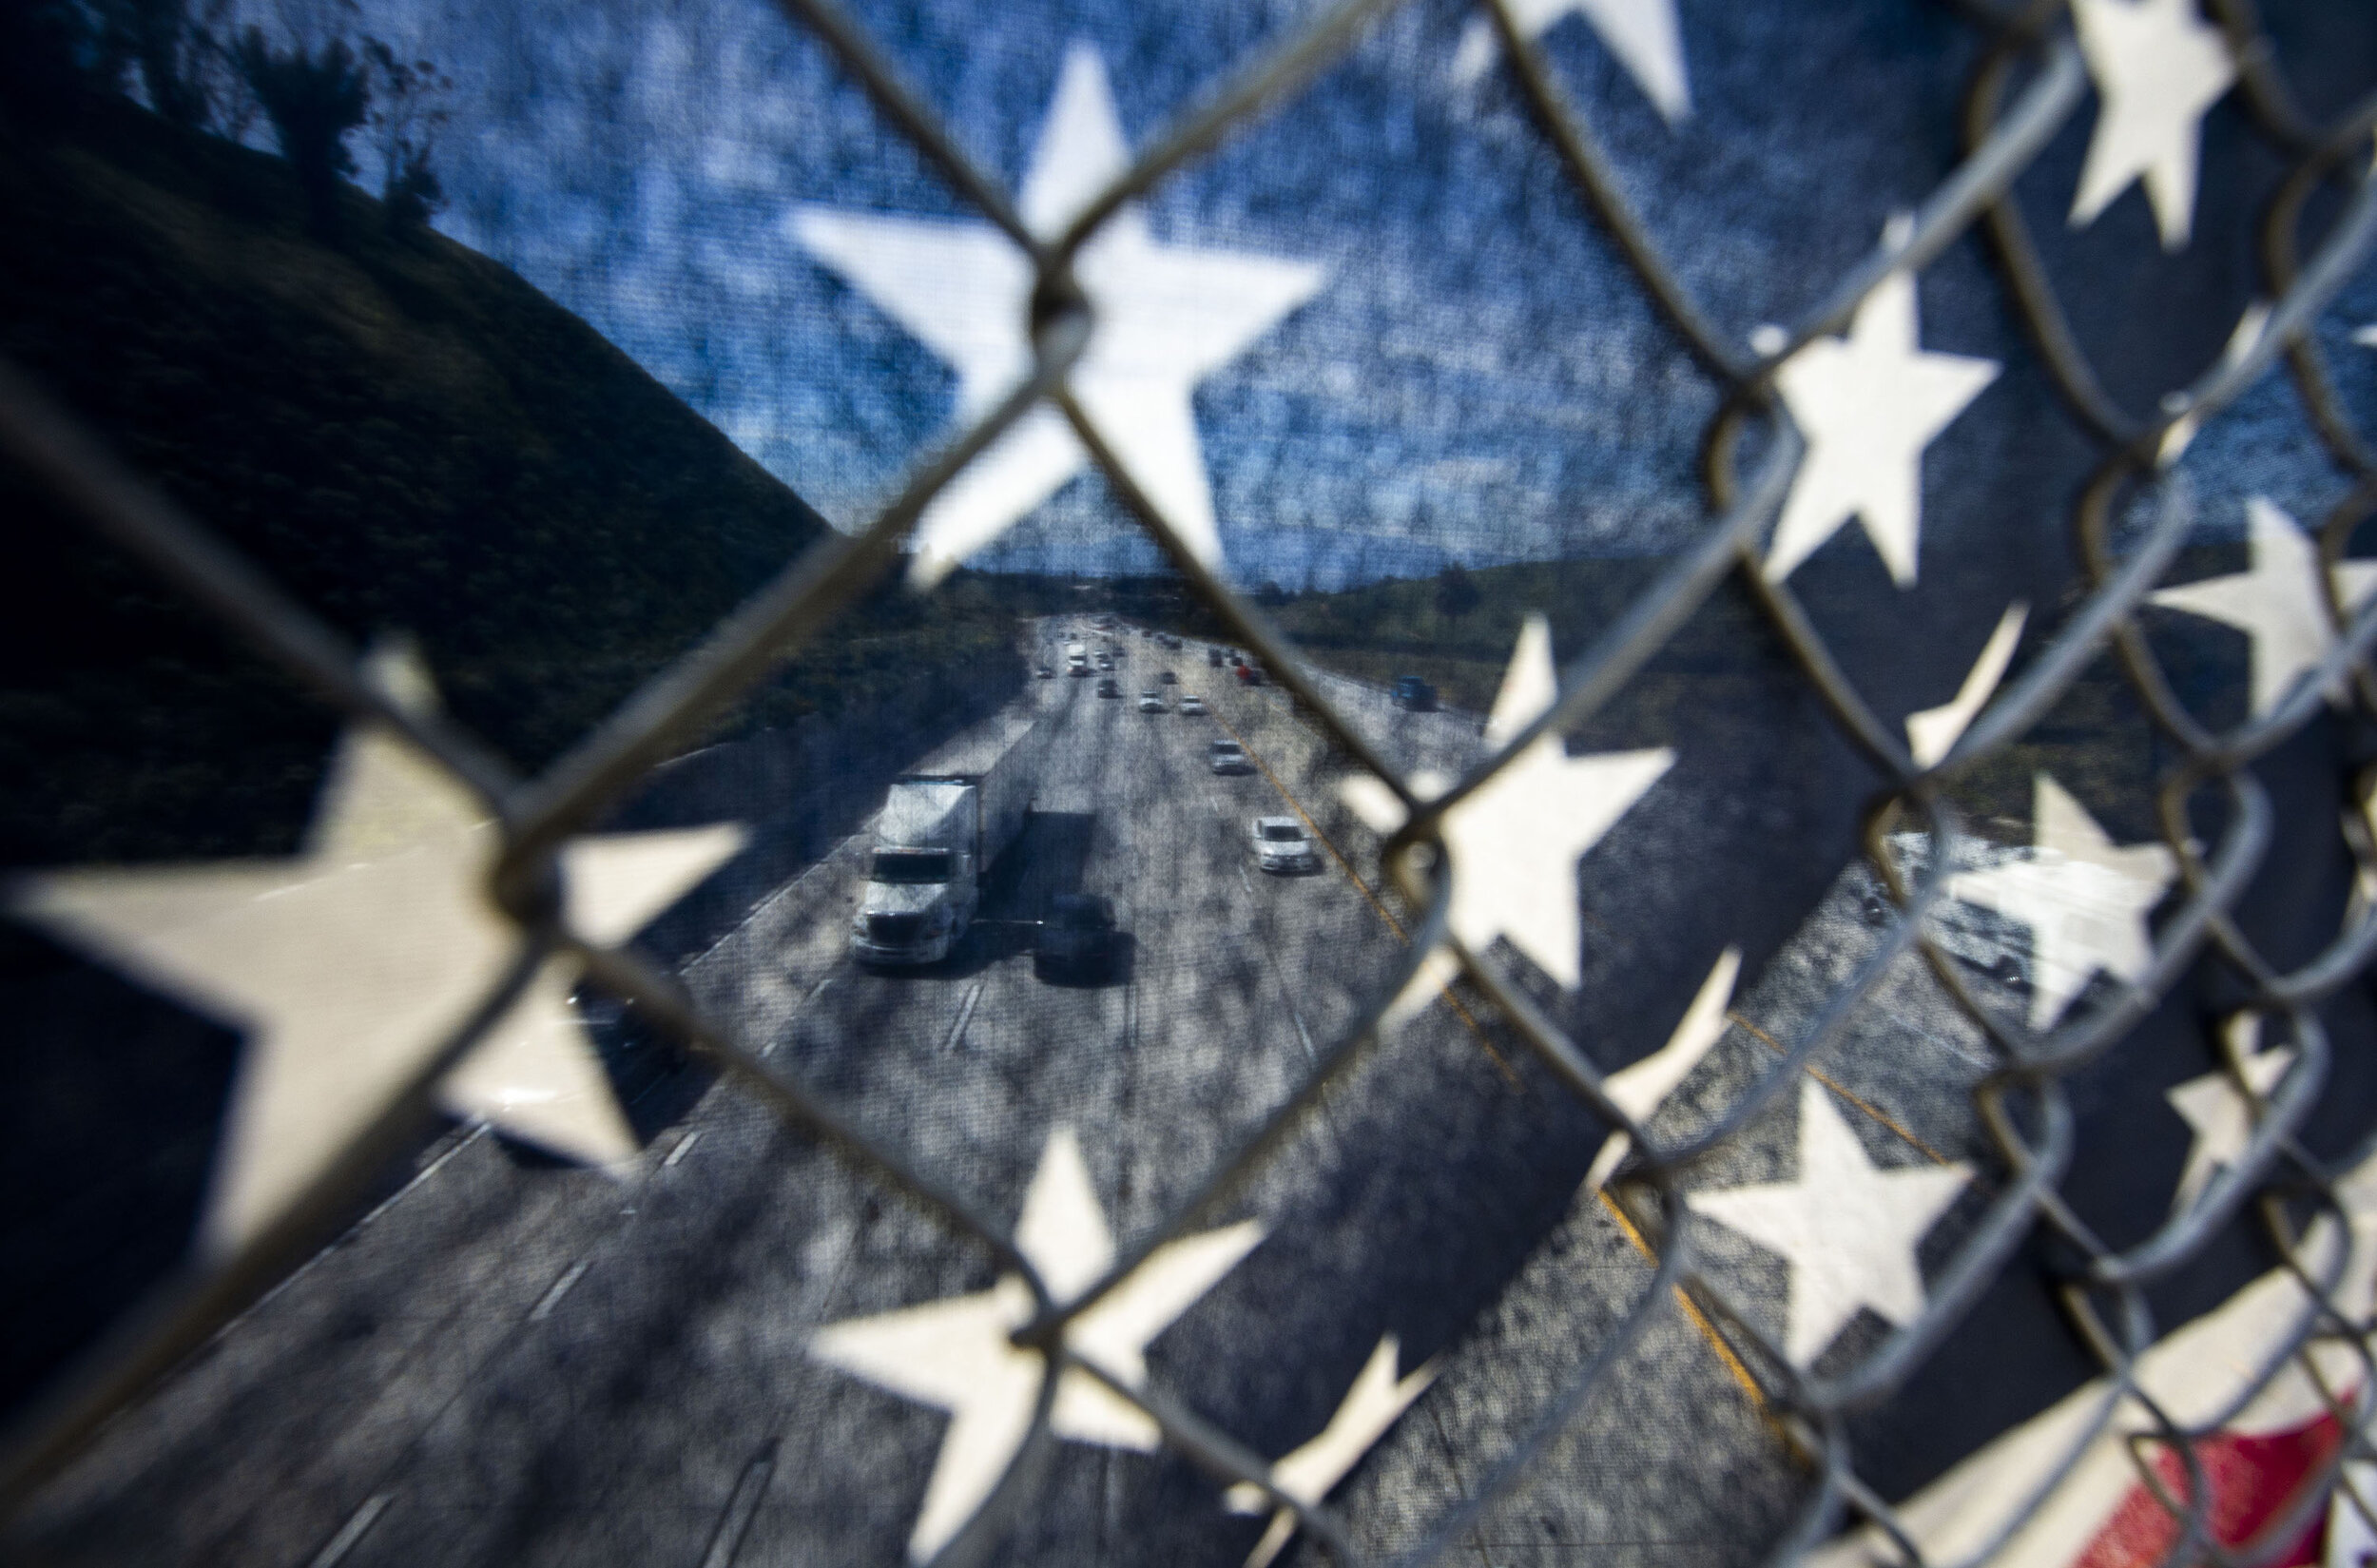  Traffic is moving on the I -10 freeway as the crossover lane is closed as seen through Old Glory on the Wabash Avenue in Redlands on Monday, April 1, 2019.  